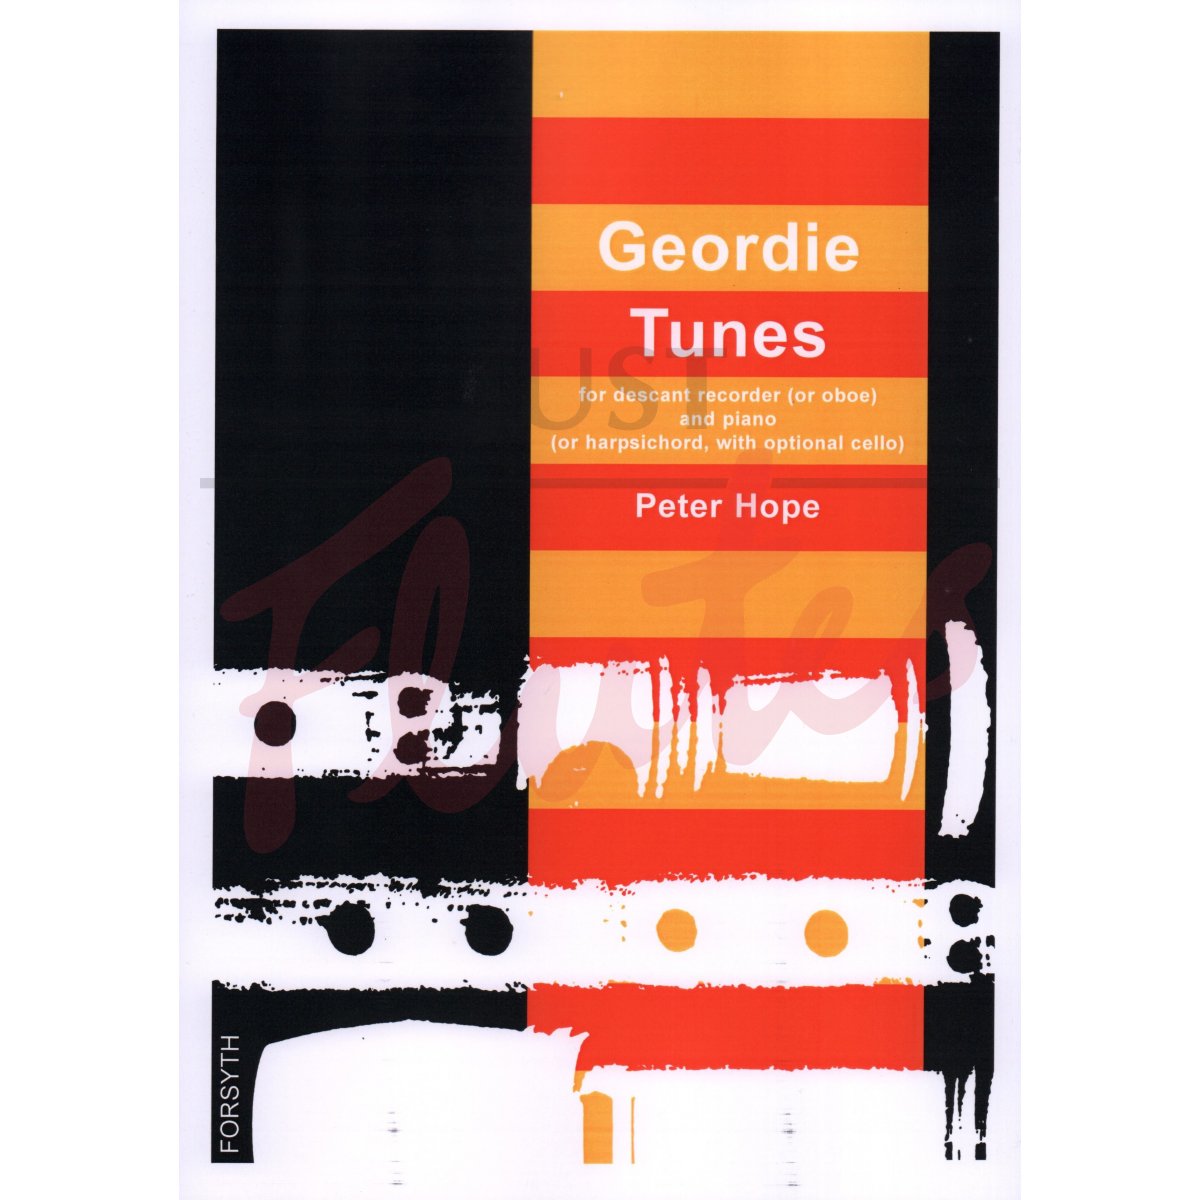 Geordie Tunes for Descant Recorder and Piano